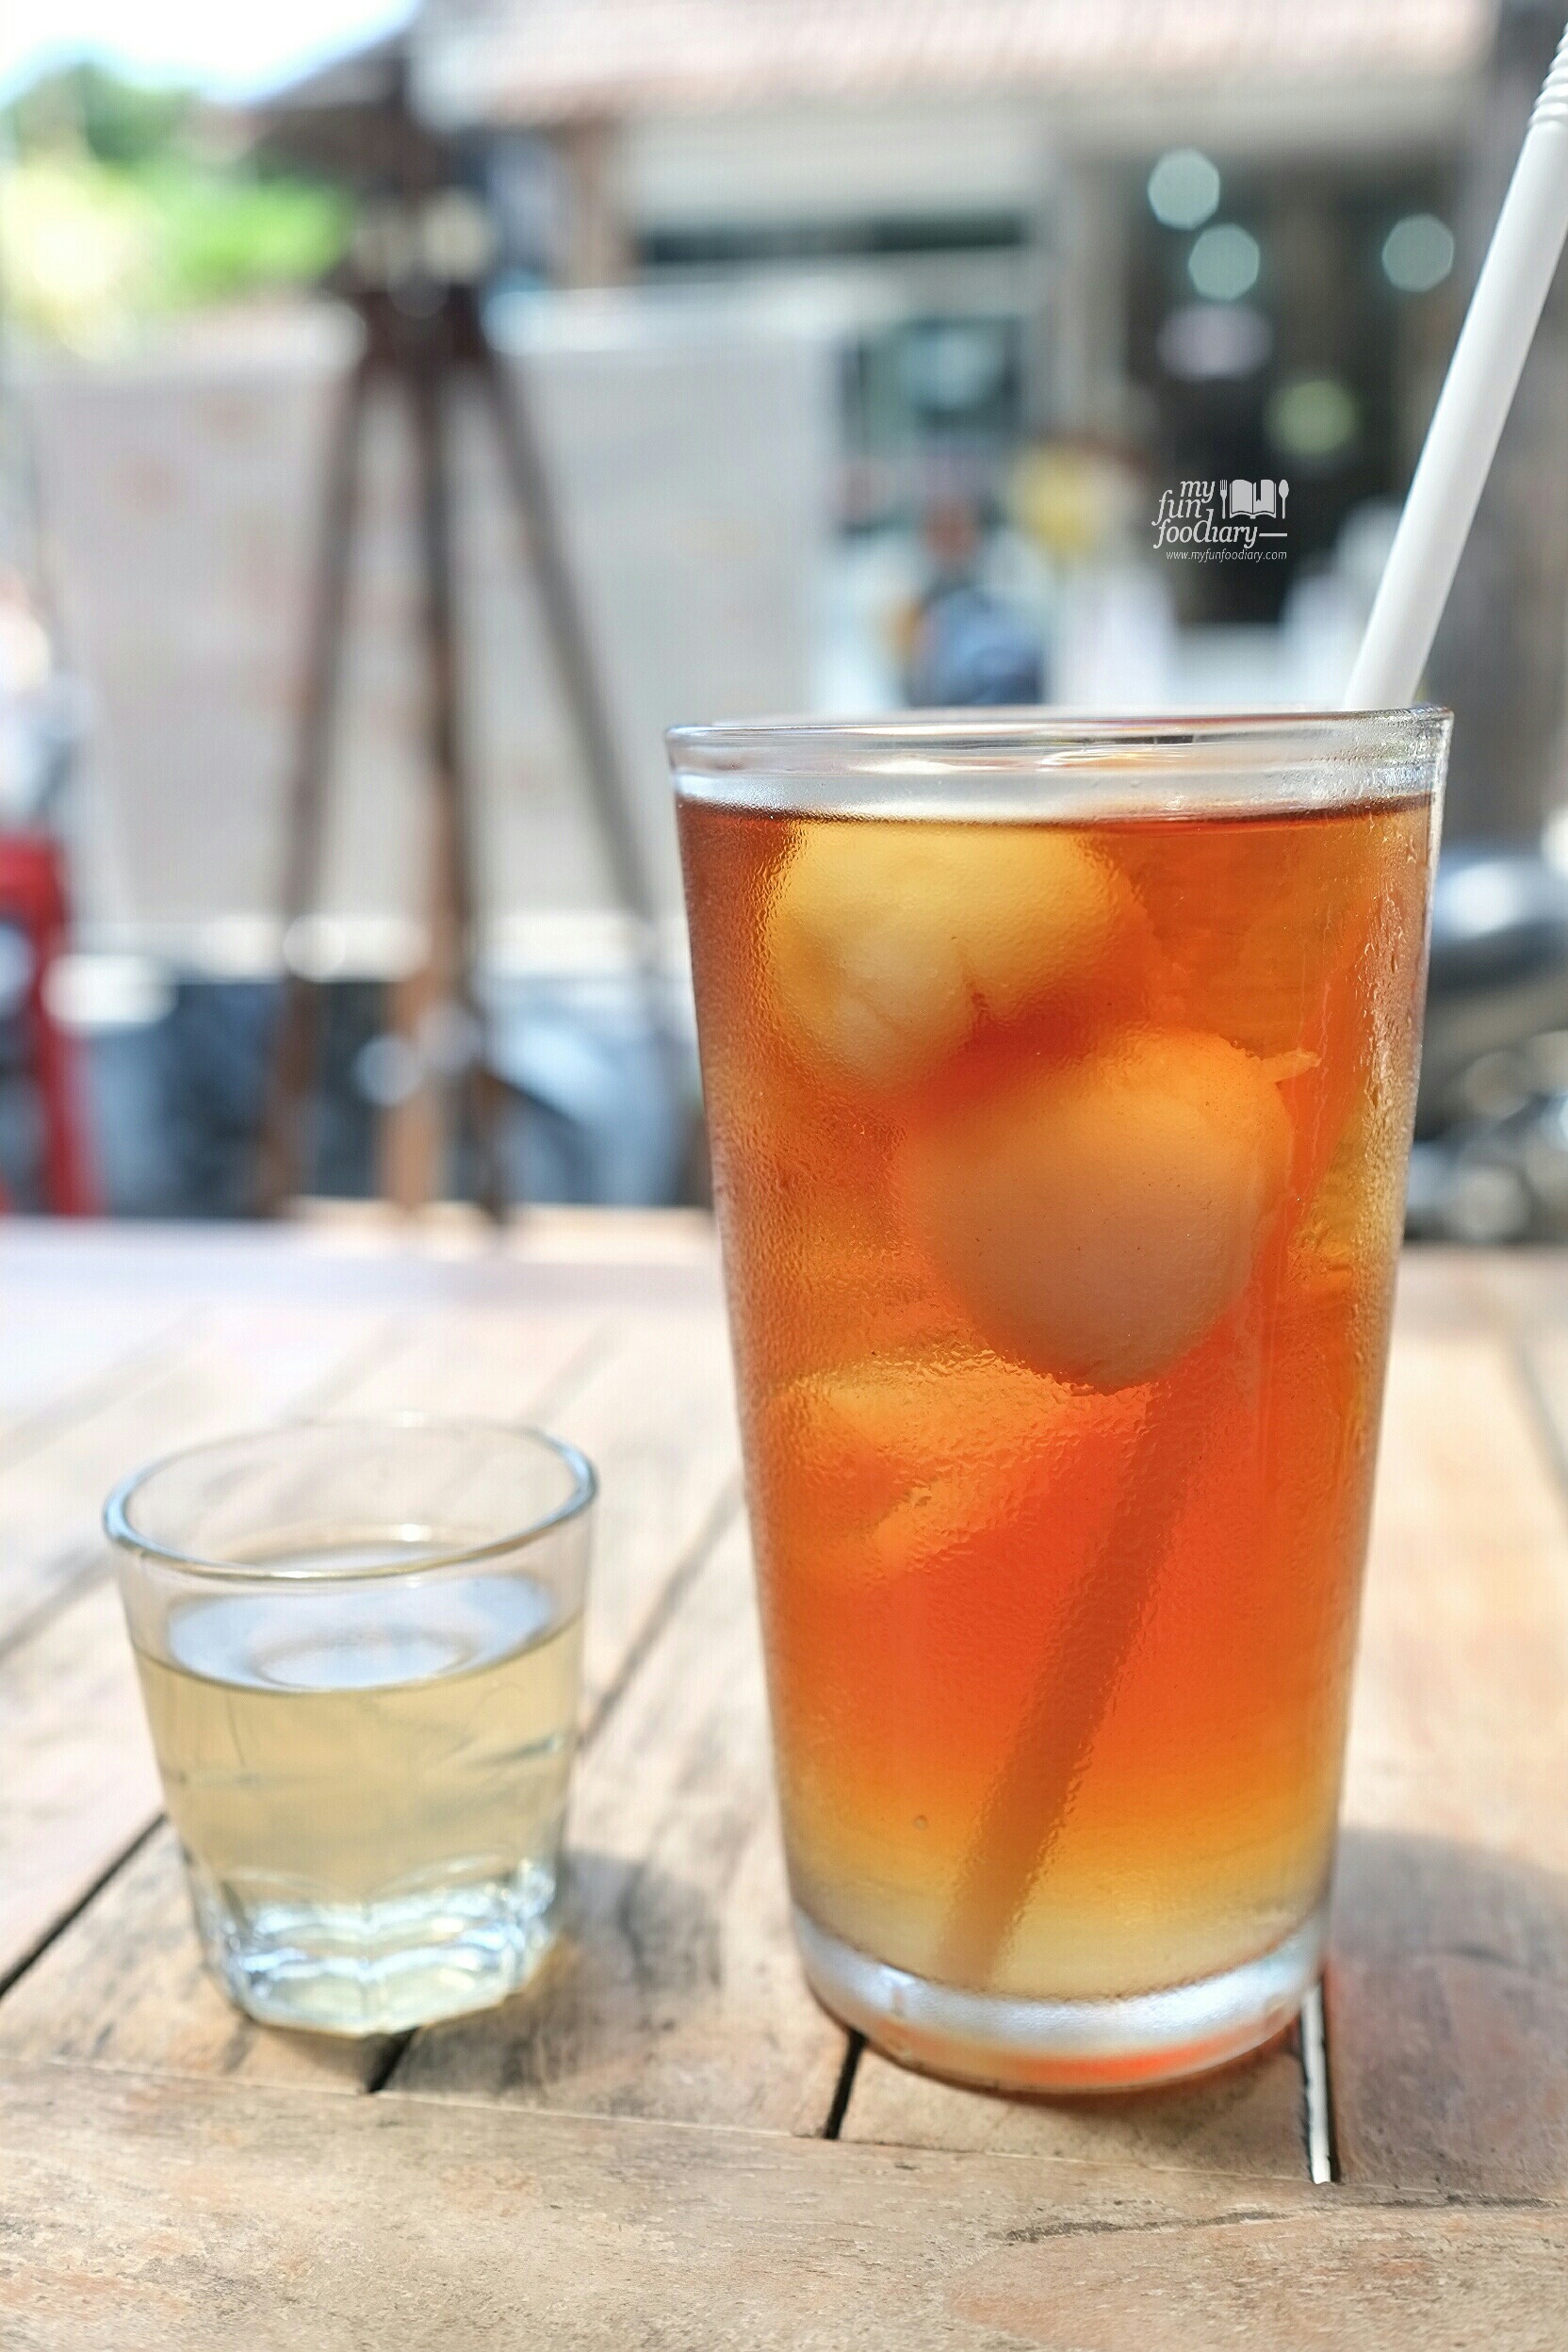 Iced Lychee Tea at Eat Well Bali by Myfunfoodiary